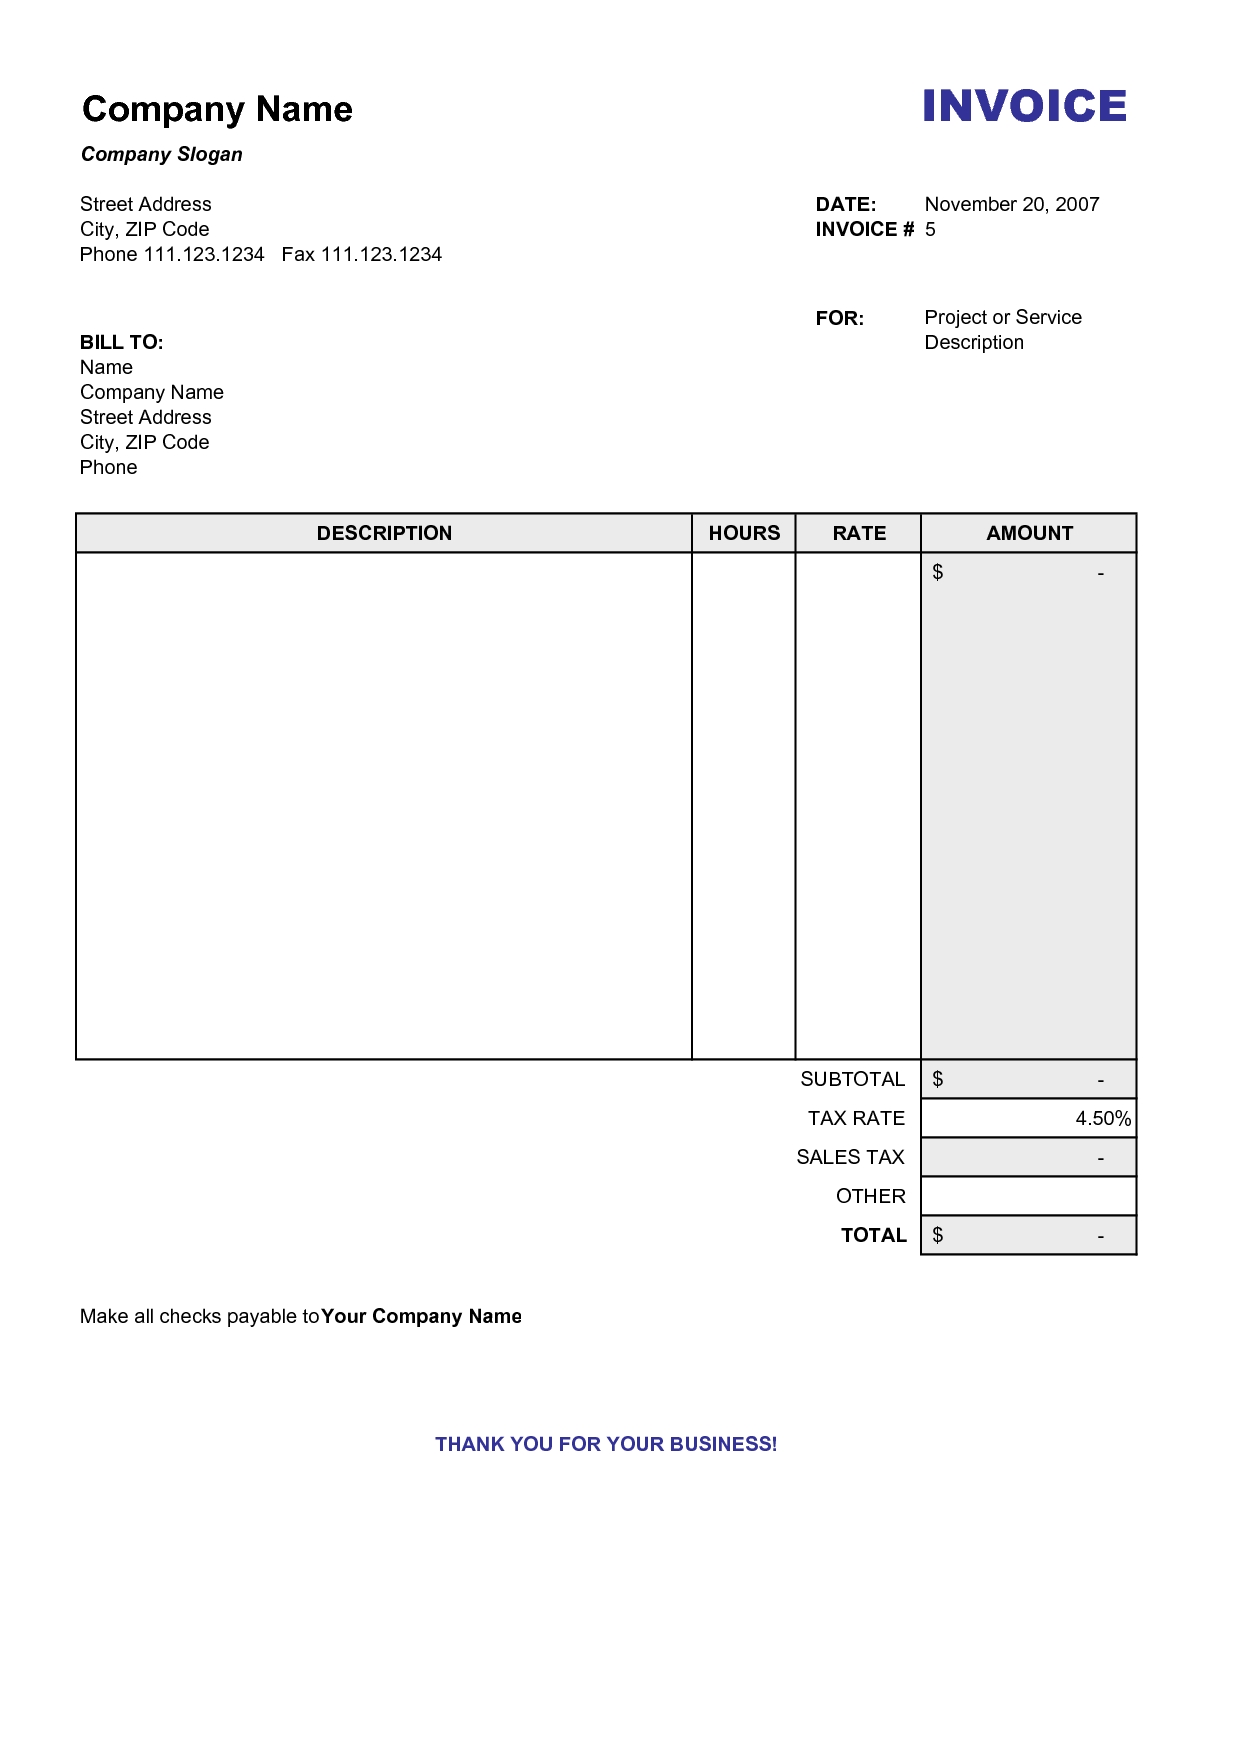 blank billing invoice scope of work template invoice example of blank billing invoice fee for services